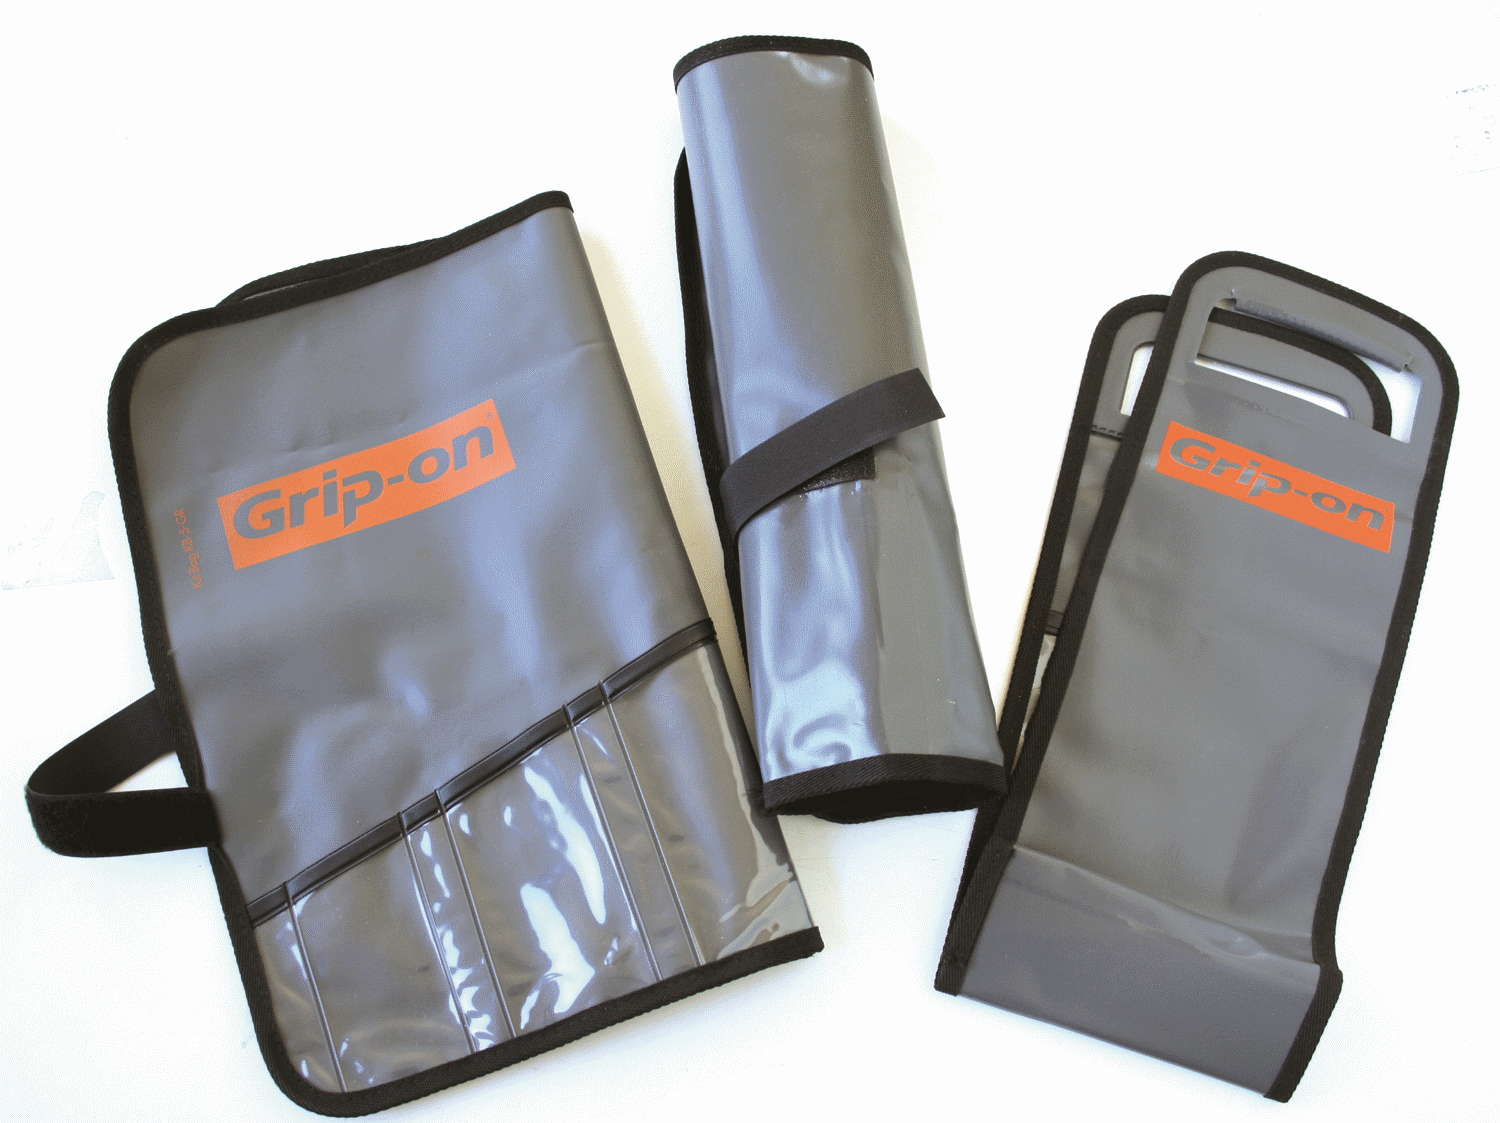 GRIP-ON Rullemappe